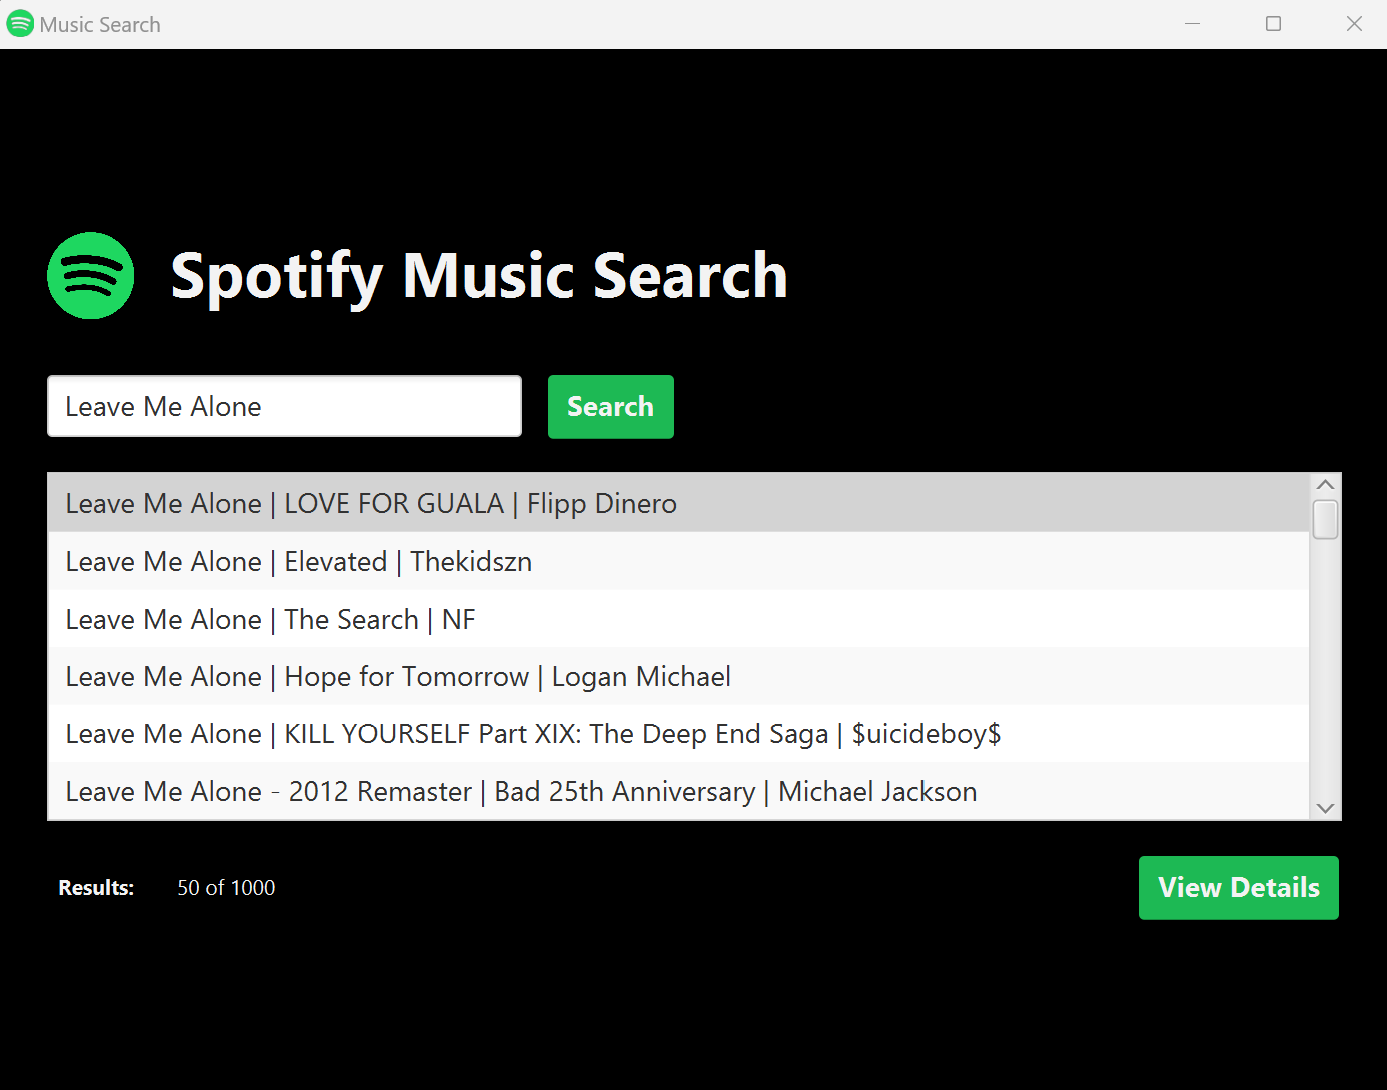 A screenshot of the spotify music search application